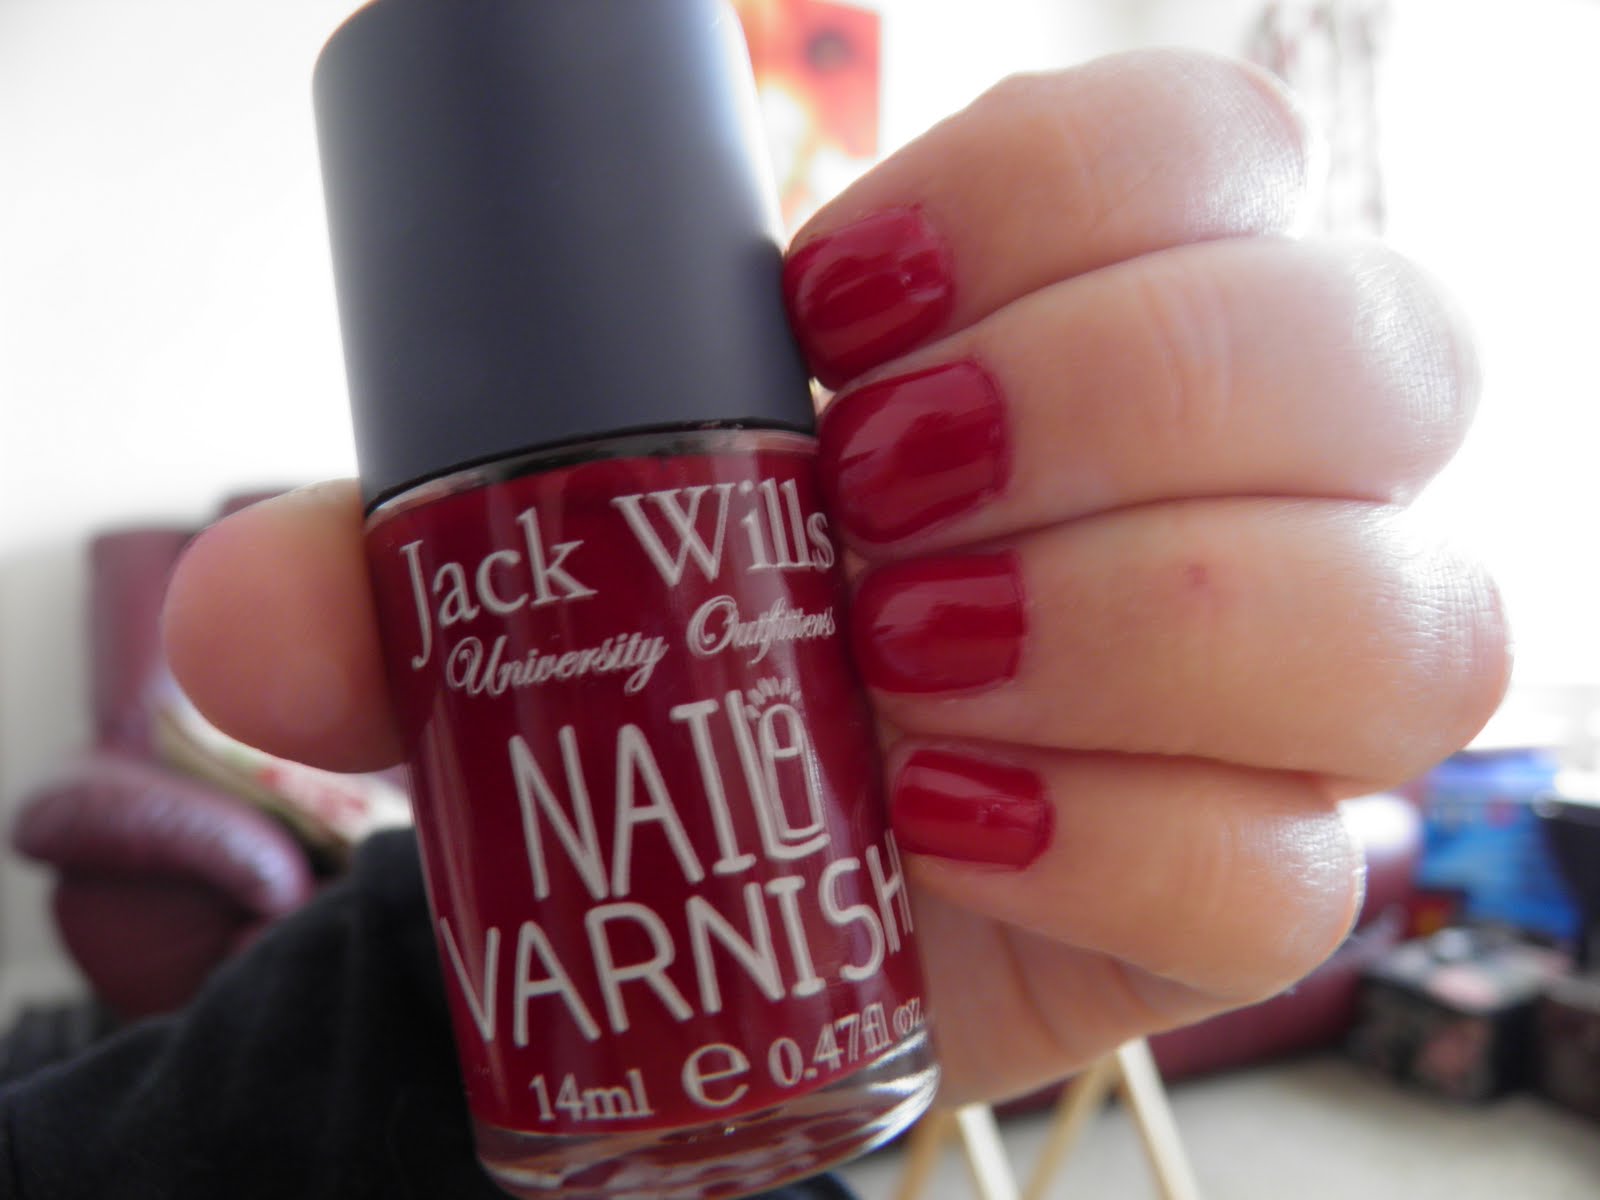 Jack Wills Nail Varnish in Burgundy Sorry for the rubbish photo and varnish